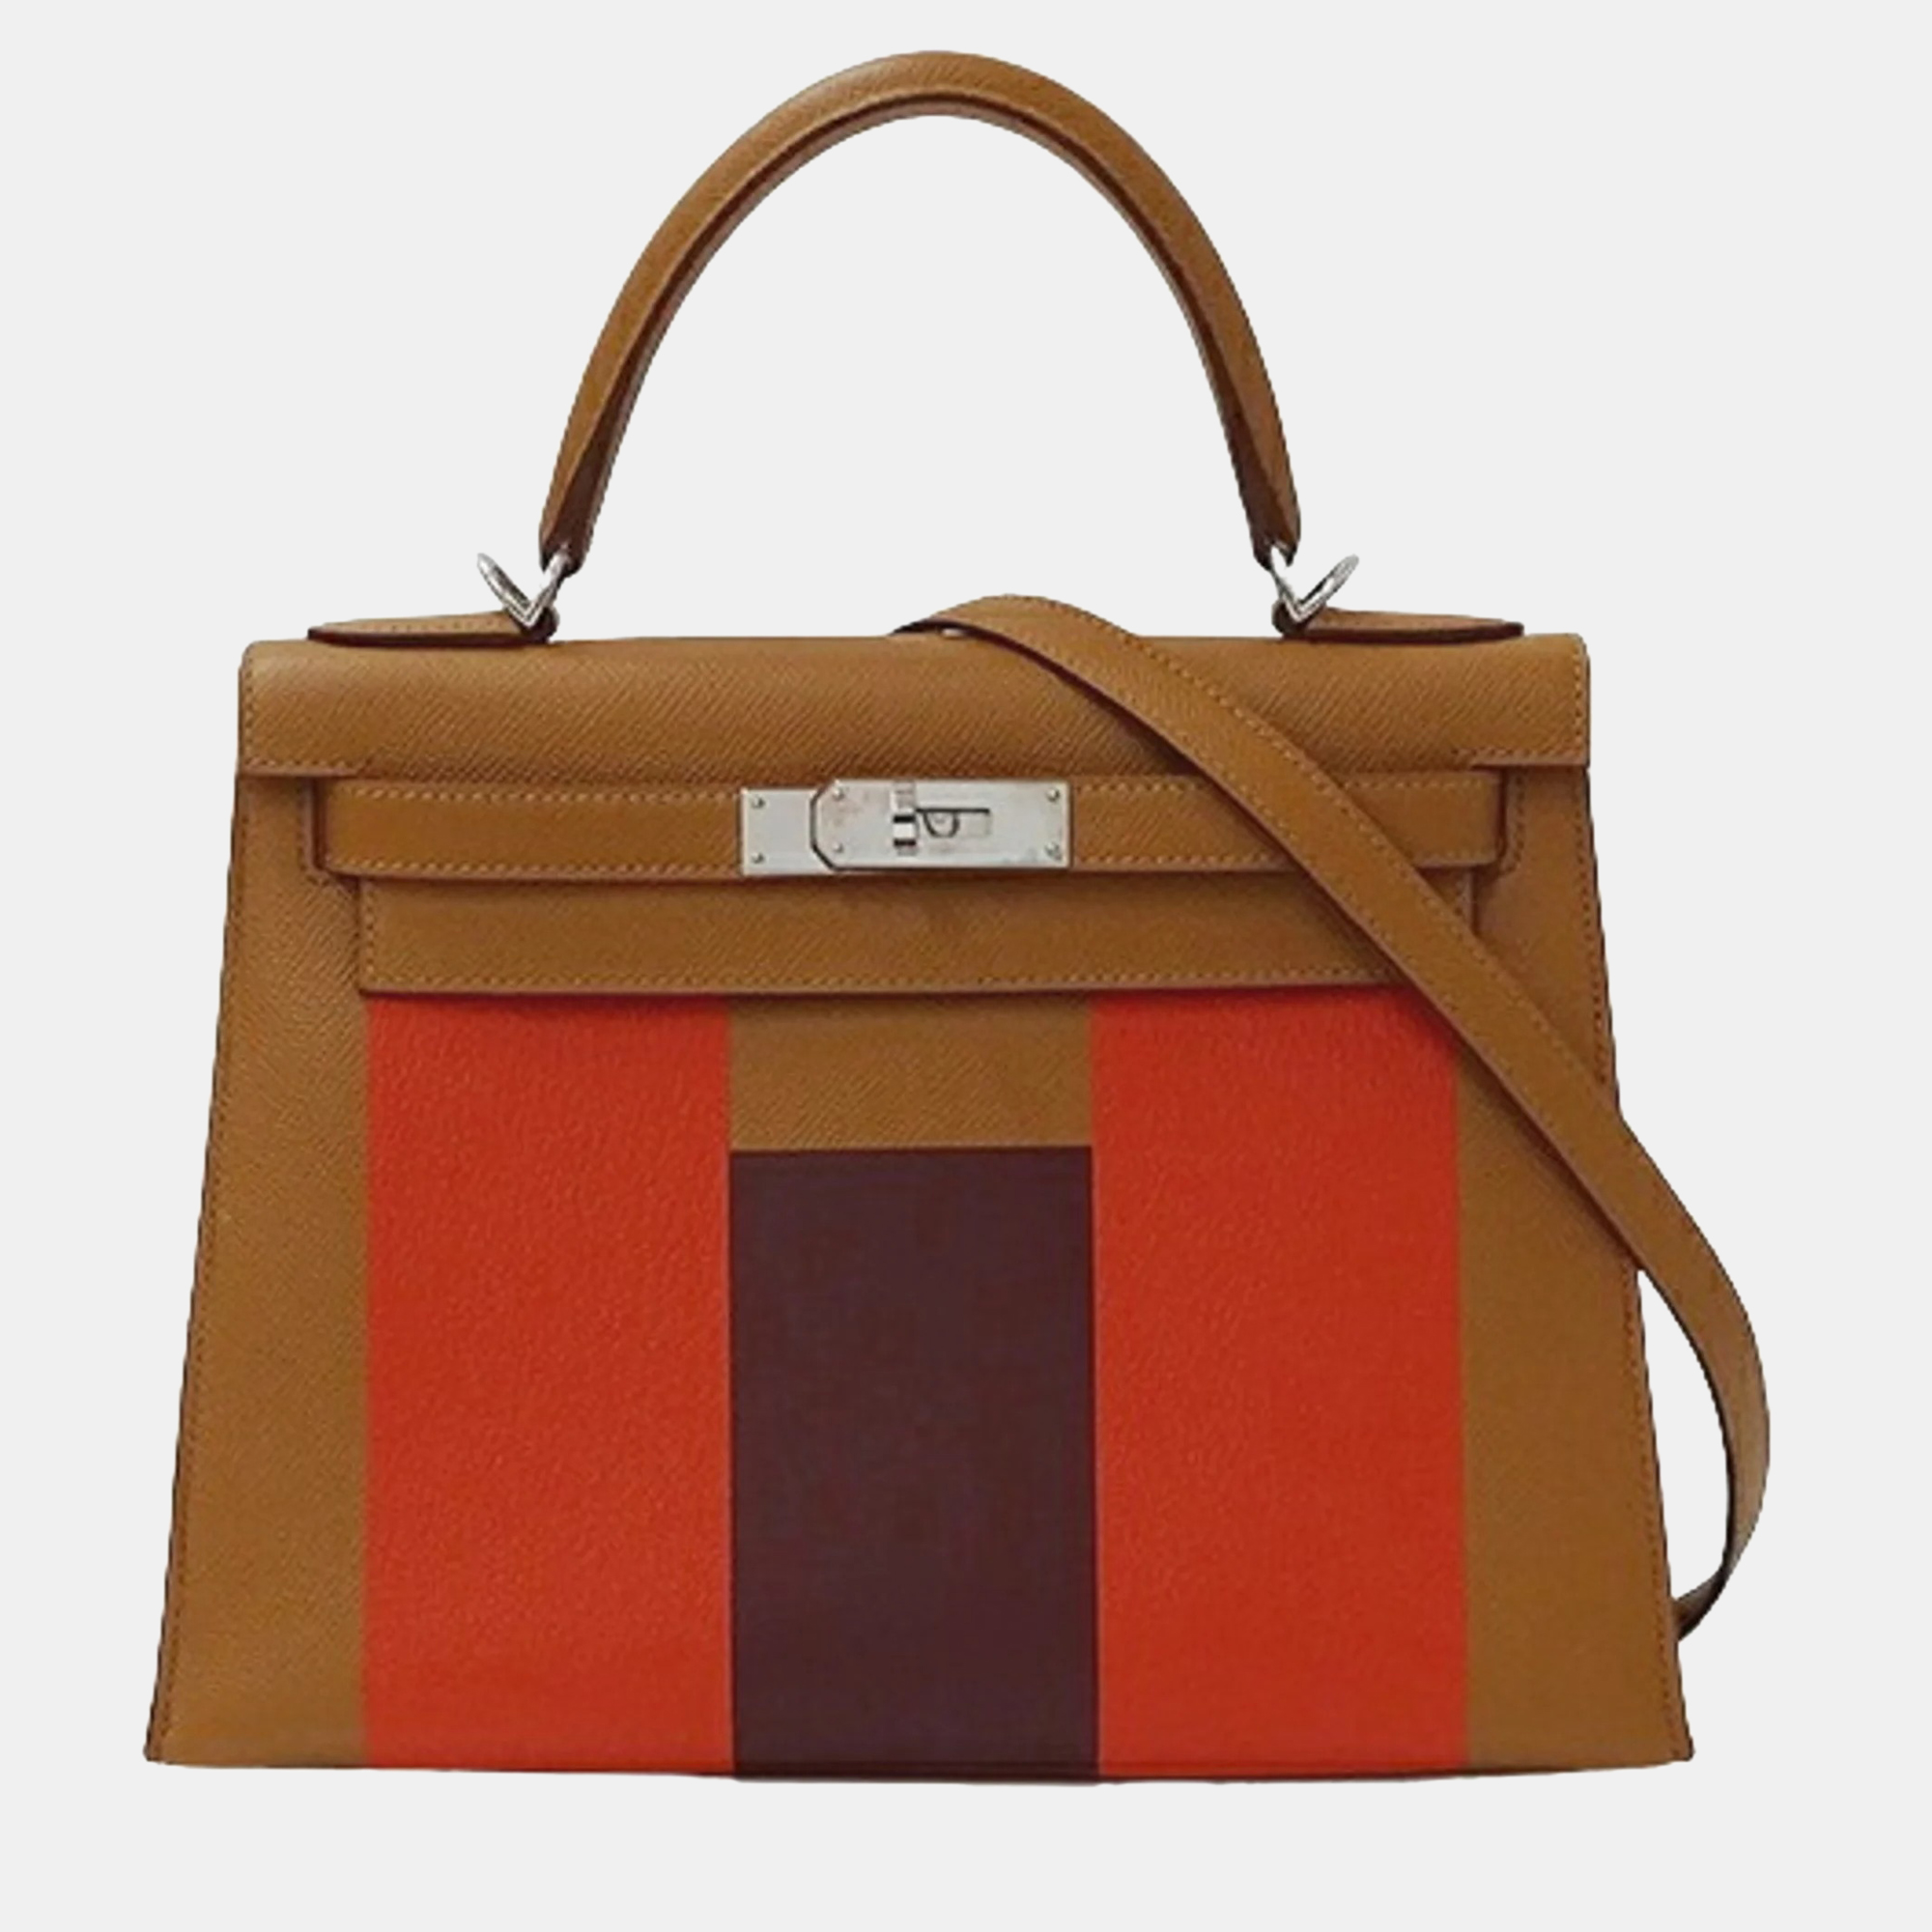 Elevate your elegance with an Hermès bag a symbol of luxury and prestige. Meticulously crafted from the finest materials it seamlessly blends timeless style with unparalleled craftsmanship.